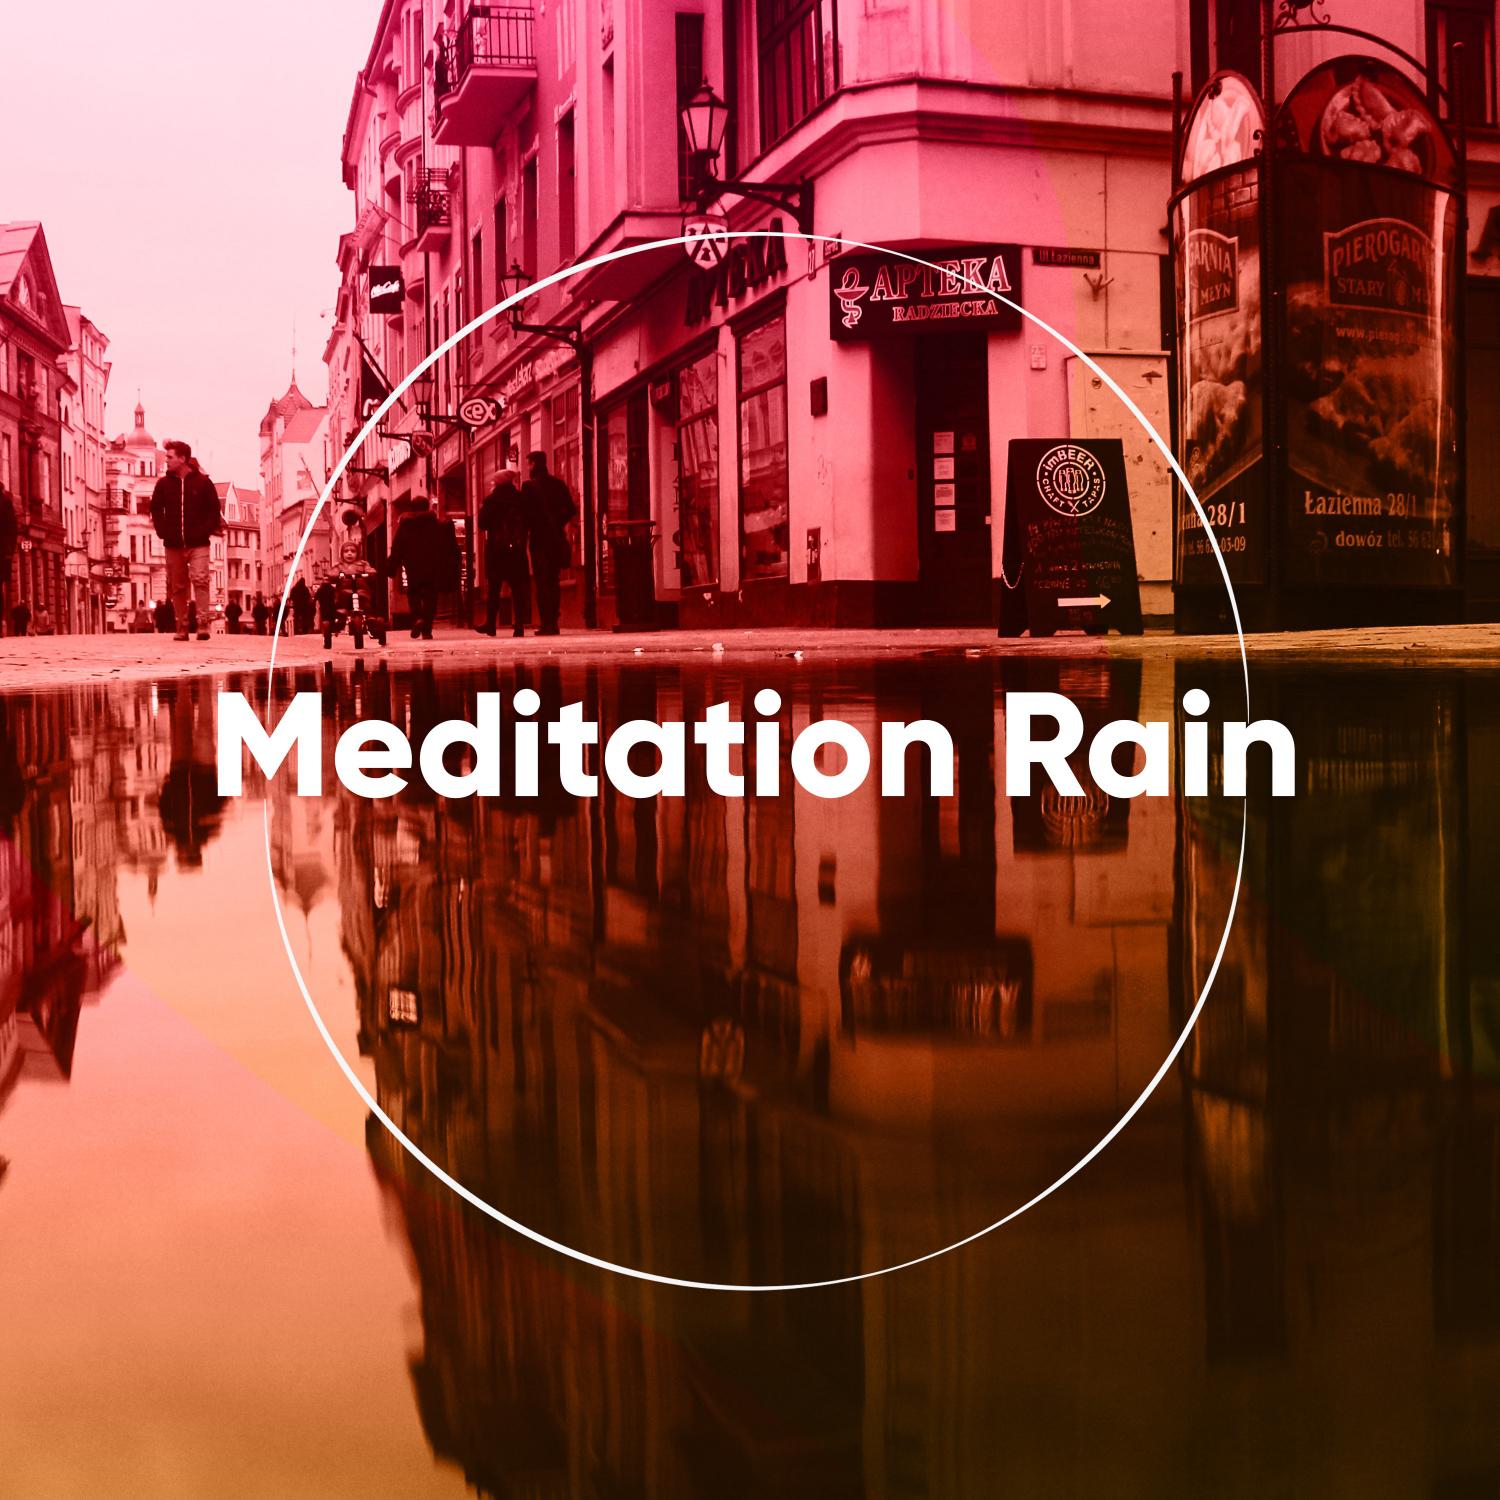 15 Meditating Rain Sounds - Loopable & Peaceful, Perfect for finding Inner Peace